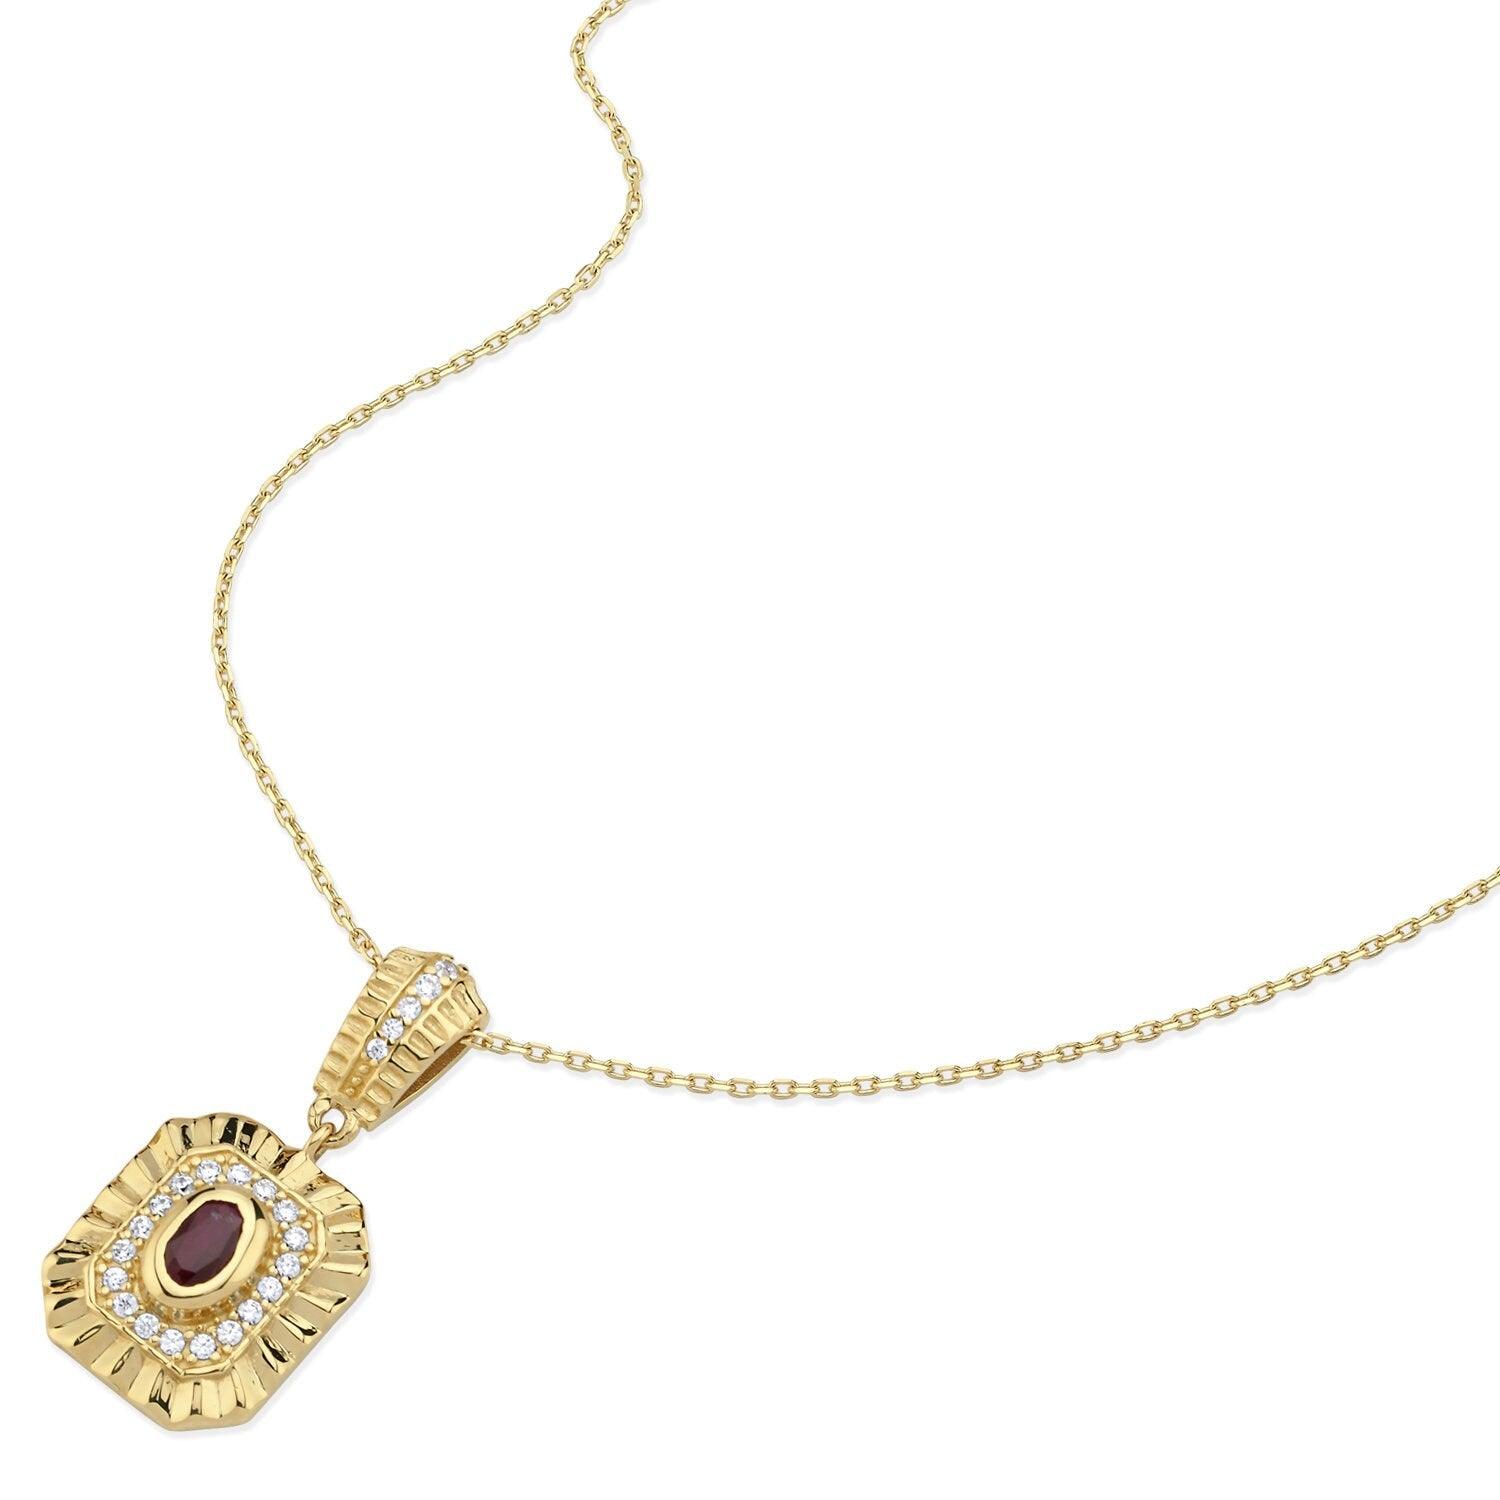 14K Gold & Red Stone Antique Necklace